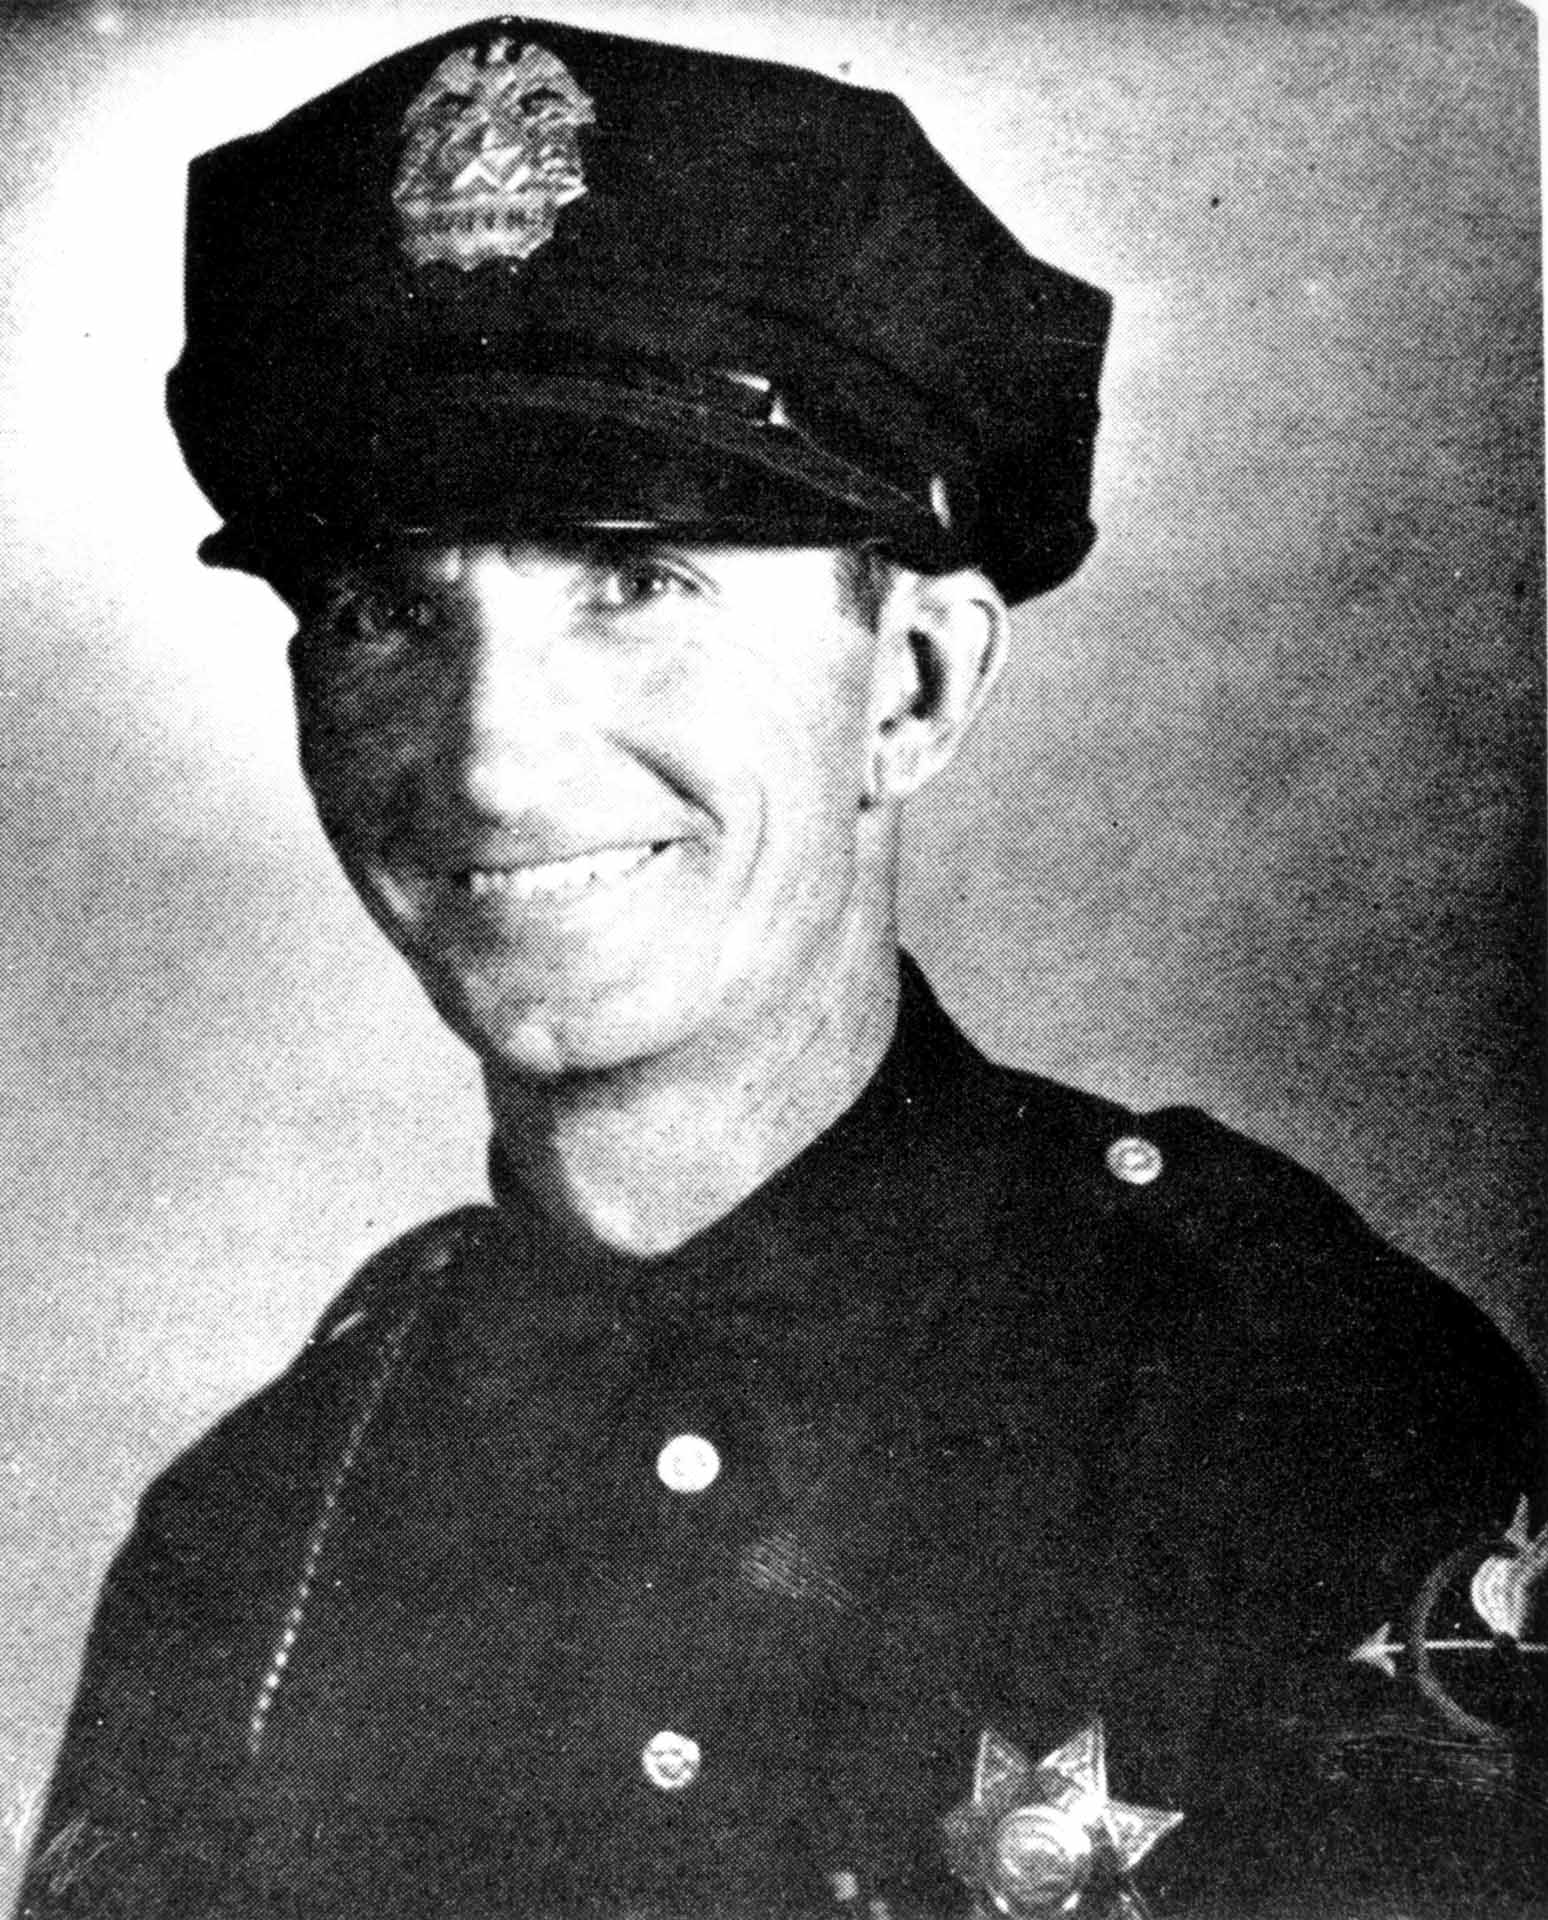 Sergeant George Chandler of the Nevada State Police